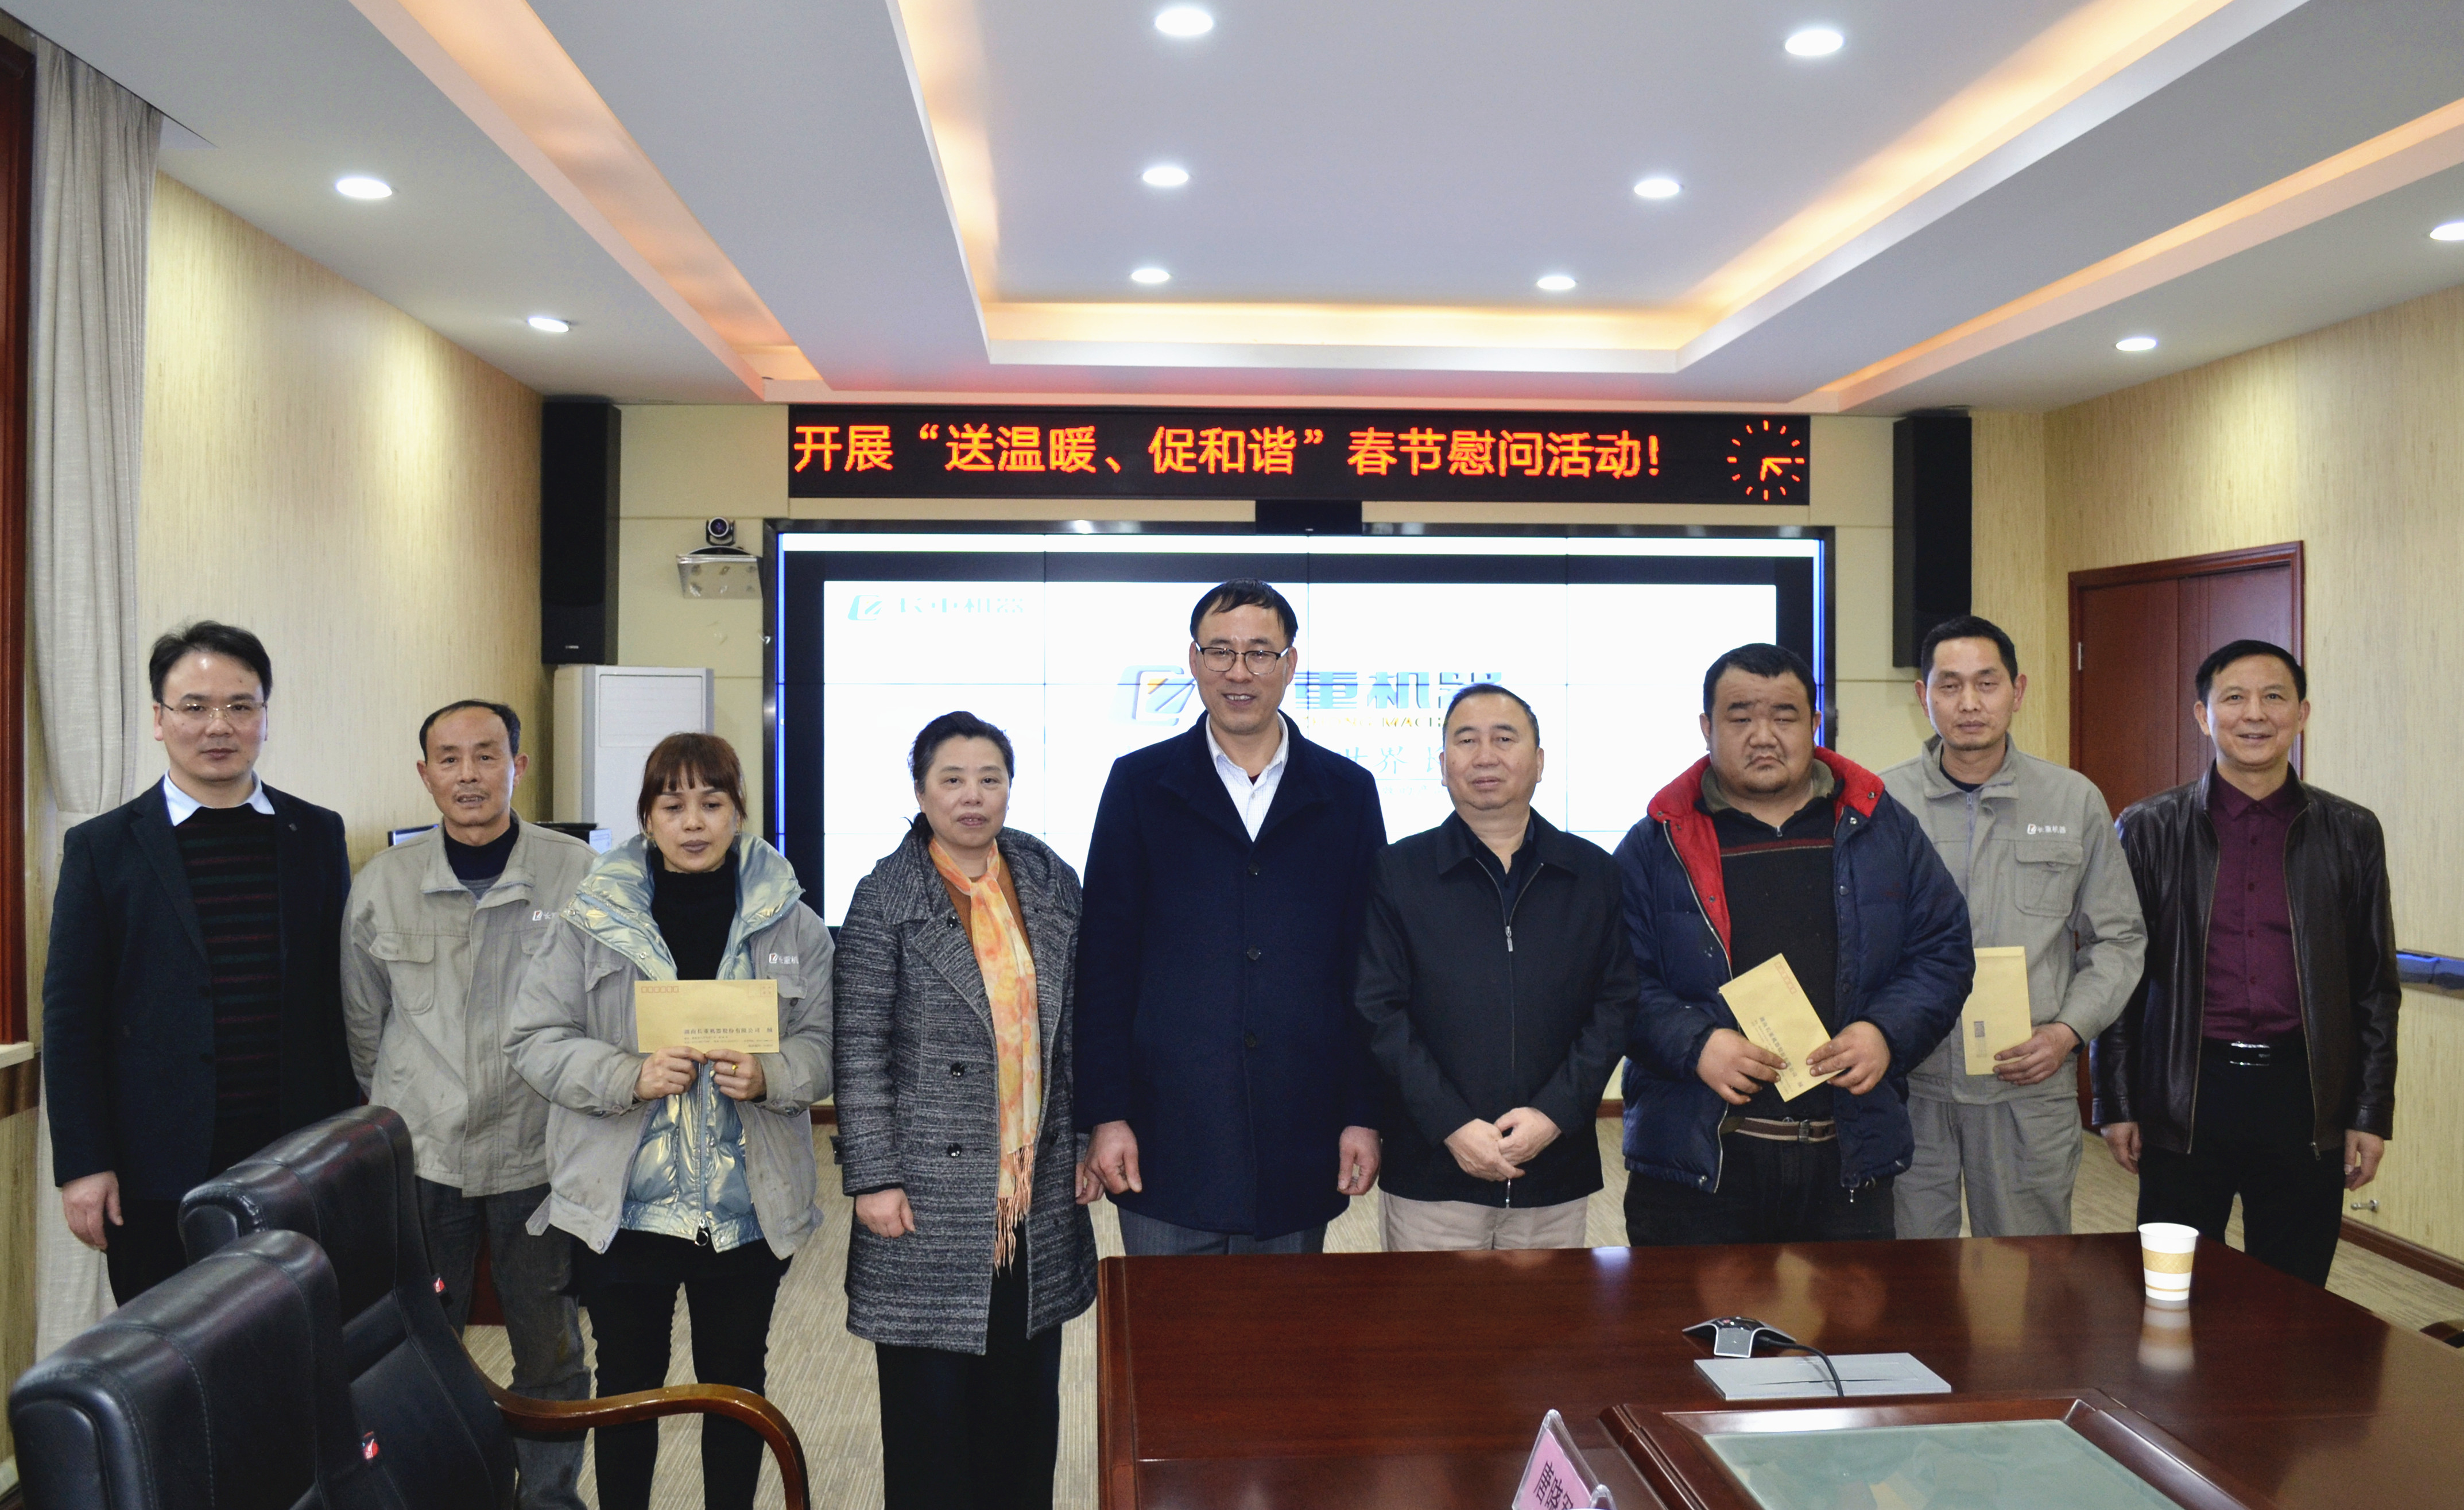 Send warmth and promote harmony! The leaders of the Municipal Bureau of Statistics visited our company to carry out the Spring Festival condolence activities